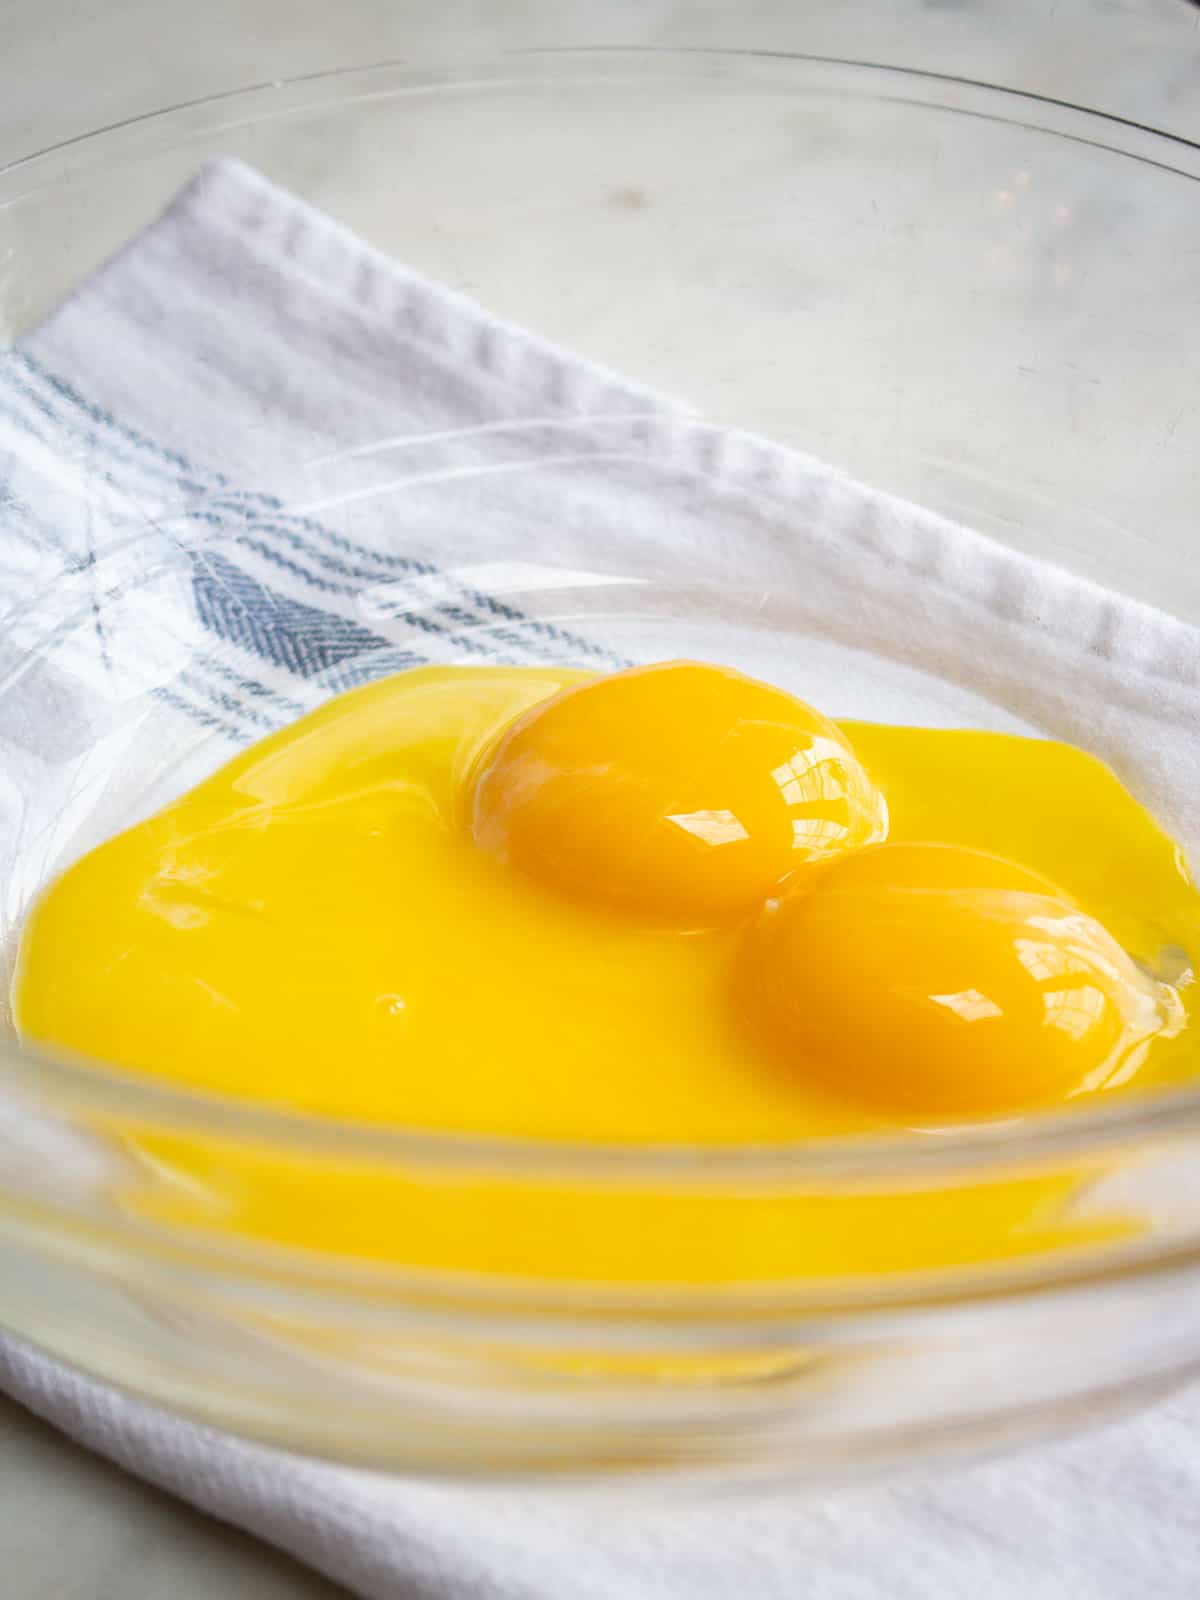 Egg yolks in a clear glass bowl placed on a white and blue striped napkin.